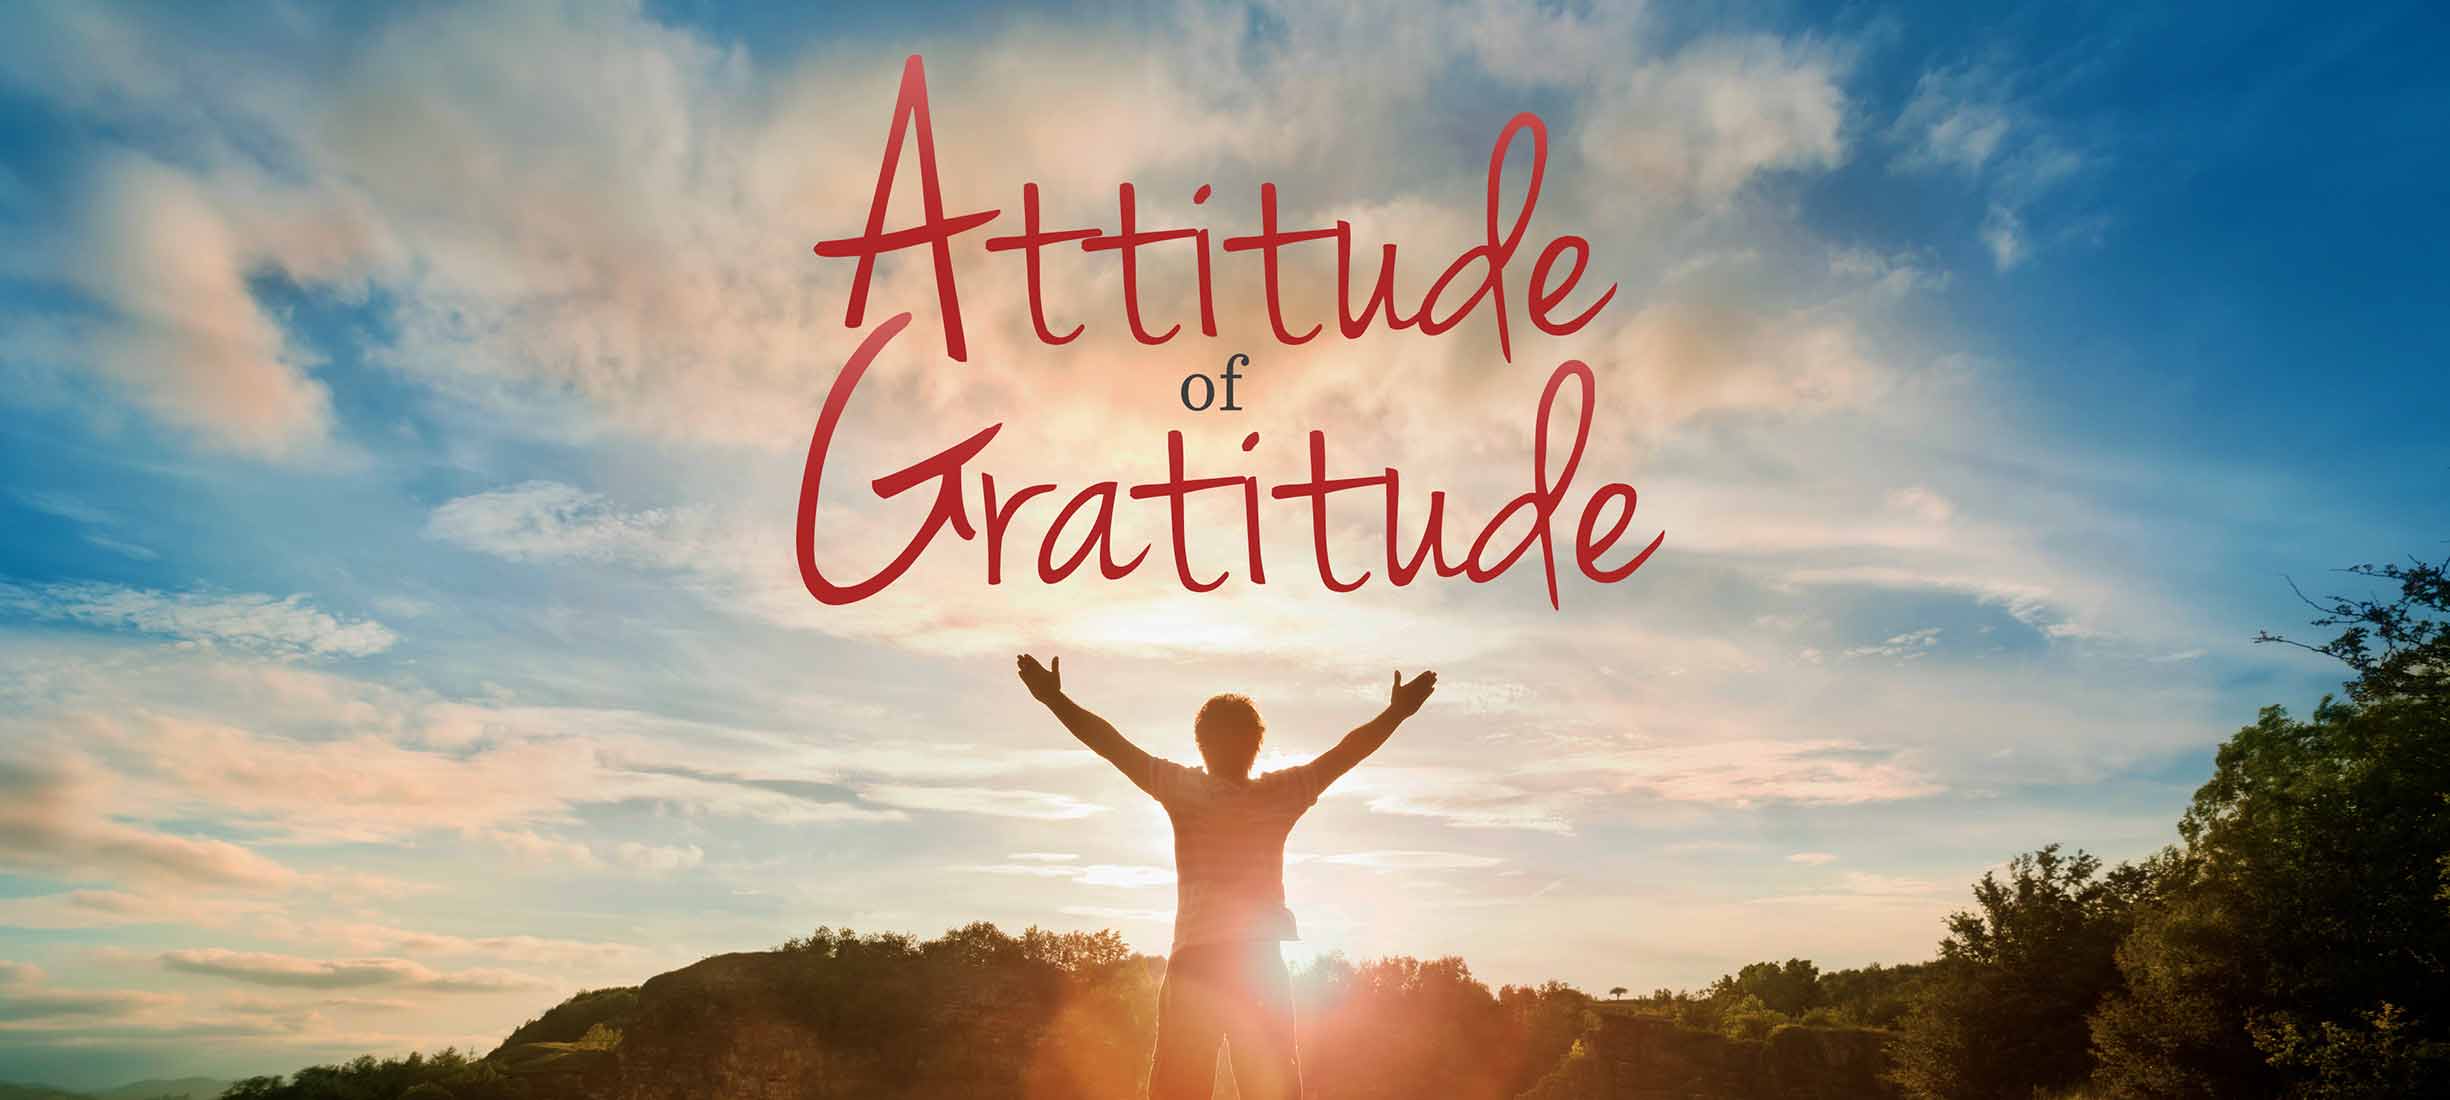 5 Ways An Attitude Of Gratitude Can Change Your Life